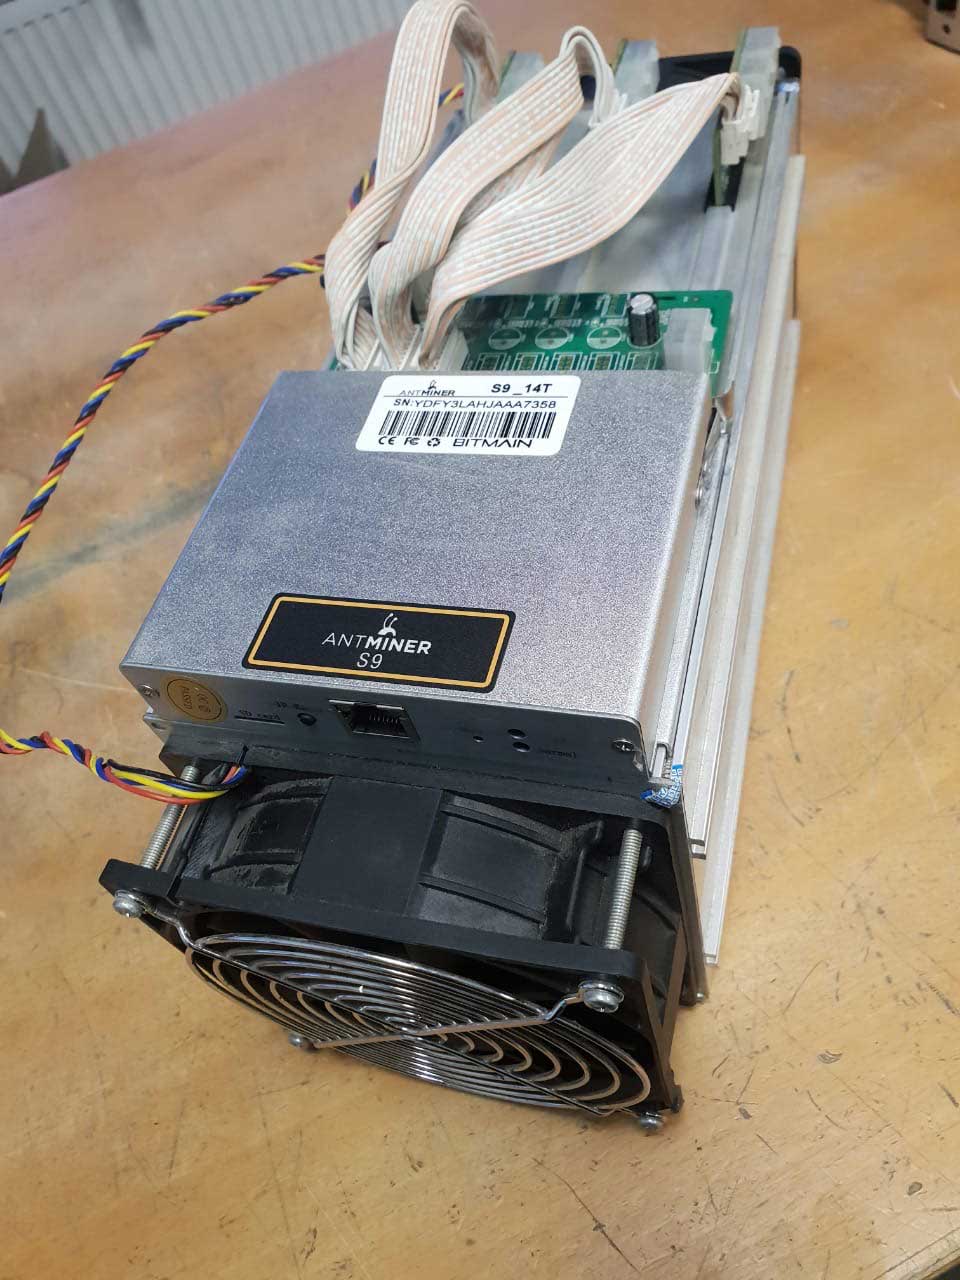 Buy AntMiner Products Online at Best Prices in South Korea | Ubuy